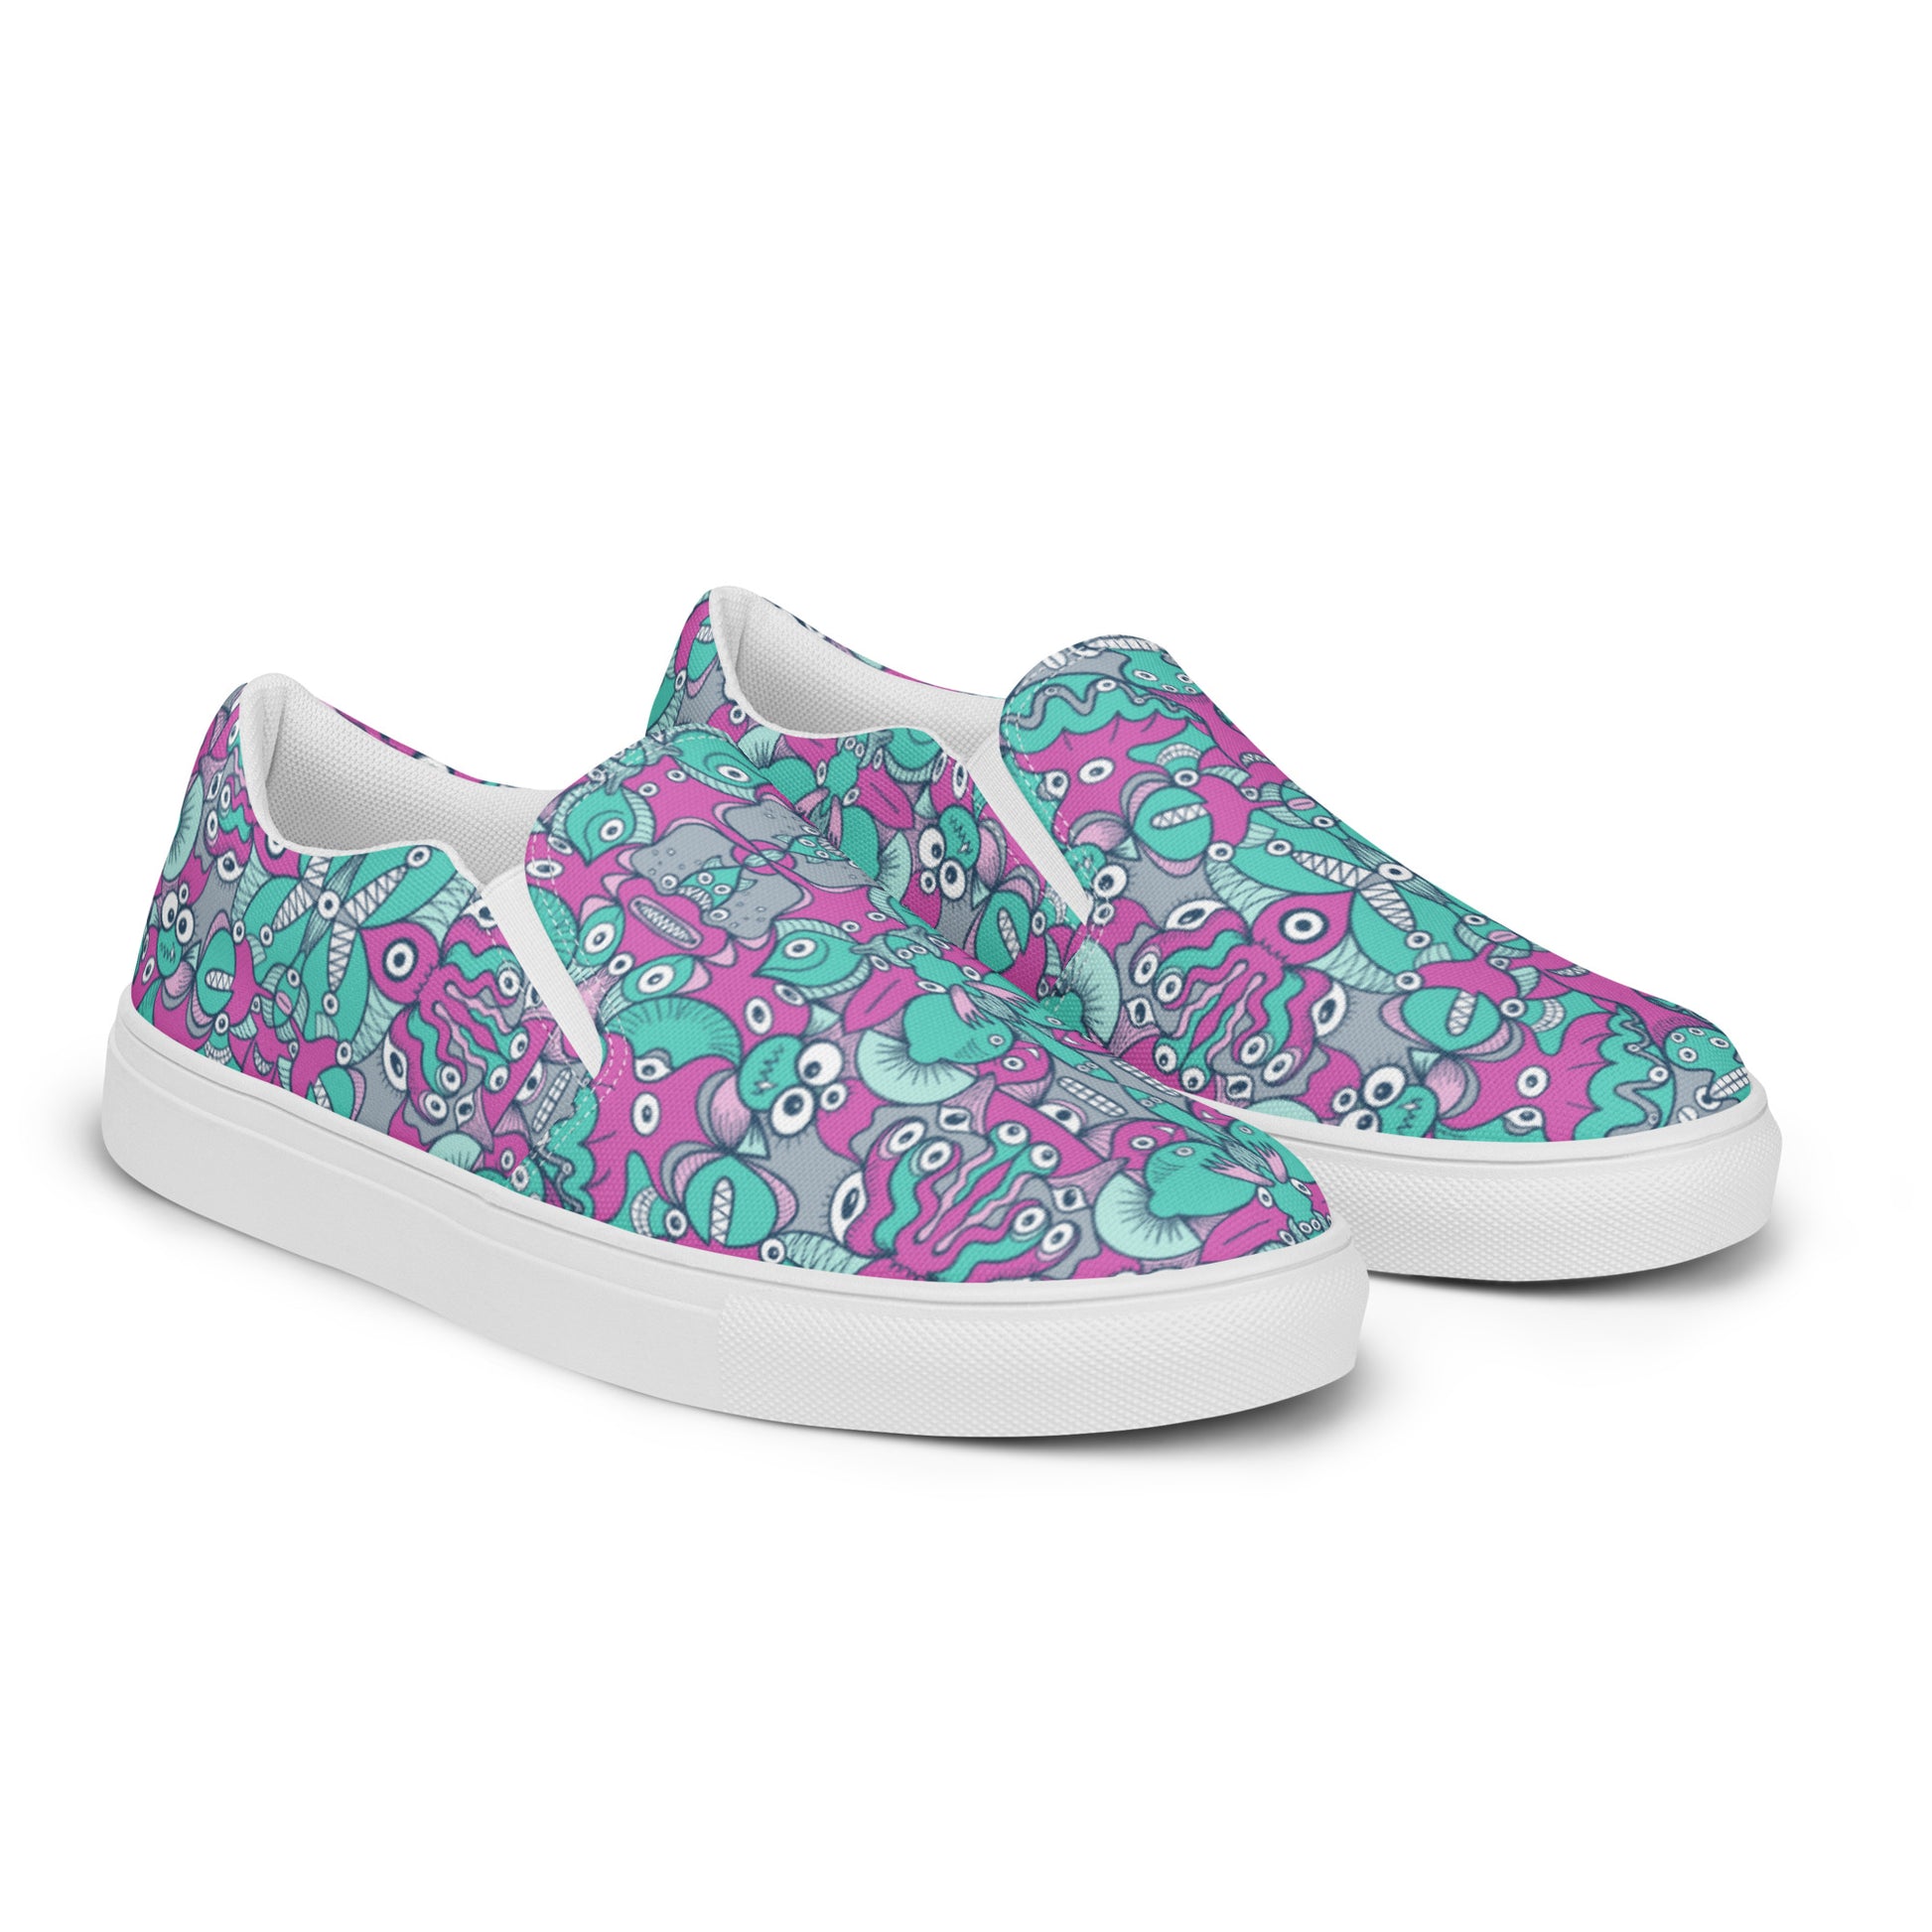 Sea creatures from an alien world Women’s slip-on canvas shoes. Overview